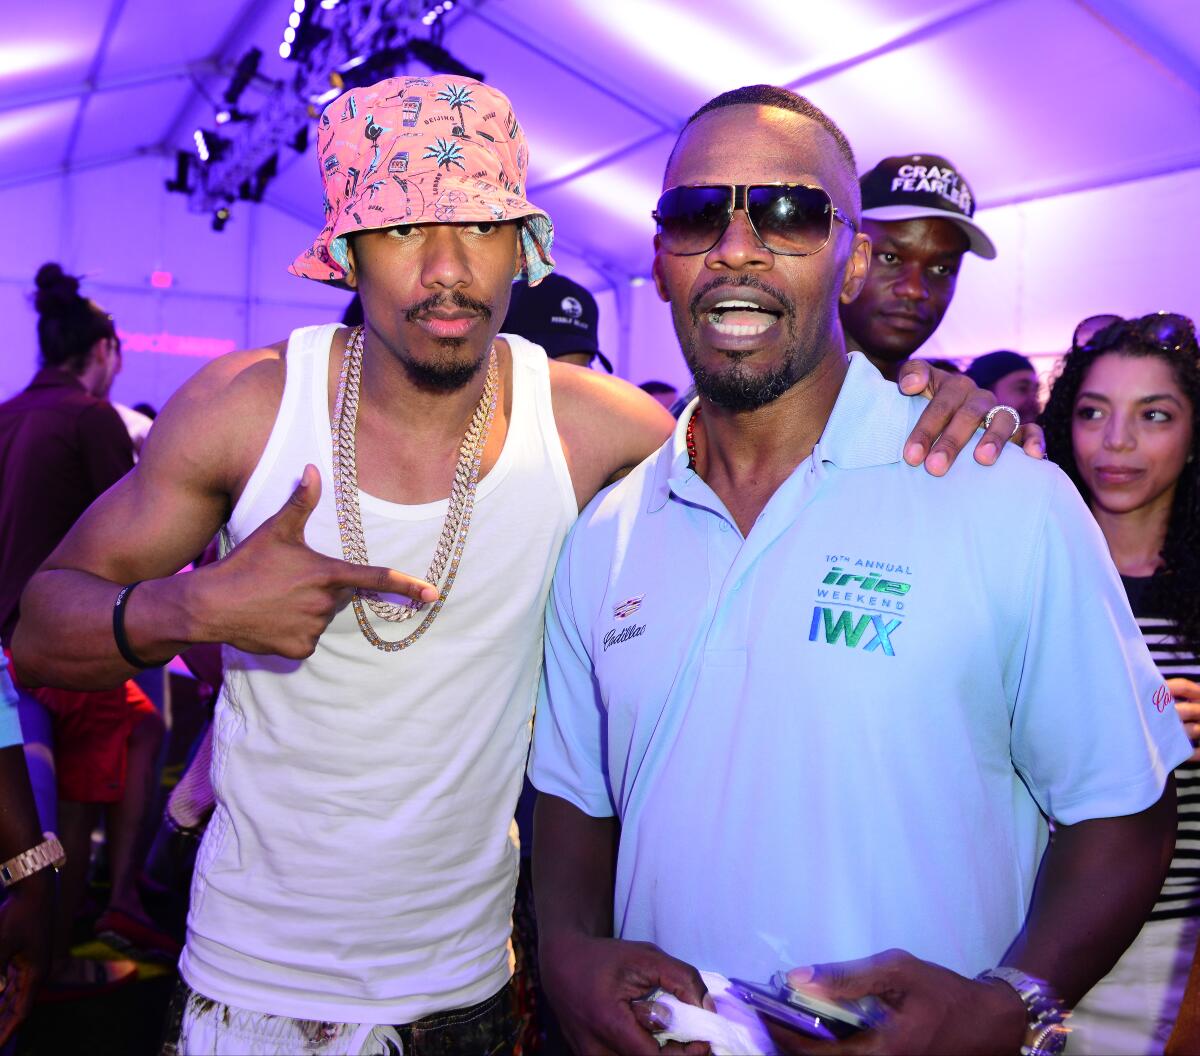 Nick Cannon, wearing a bucket hat and white tank top, poses next to Jamie Foxx, who is in a blue polo shirt and sunglasses